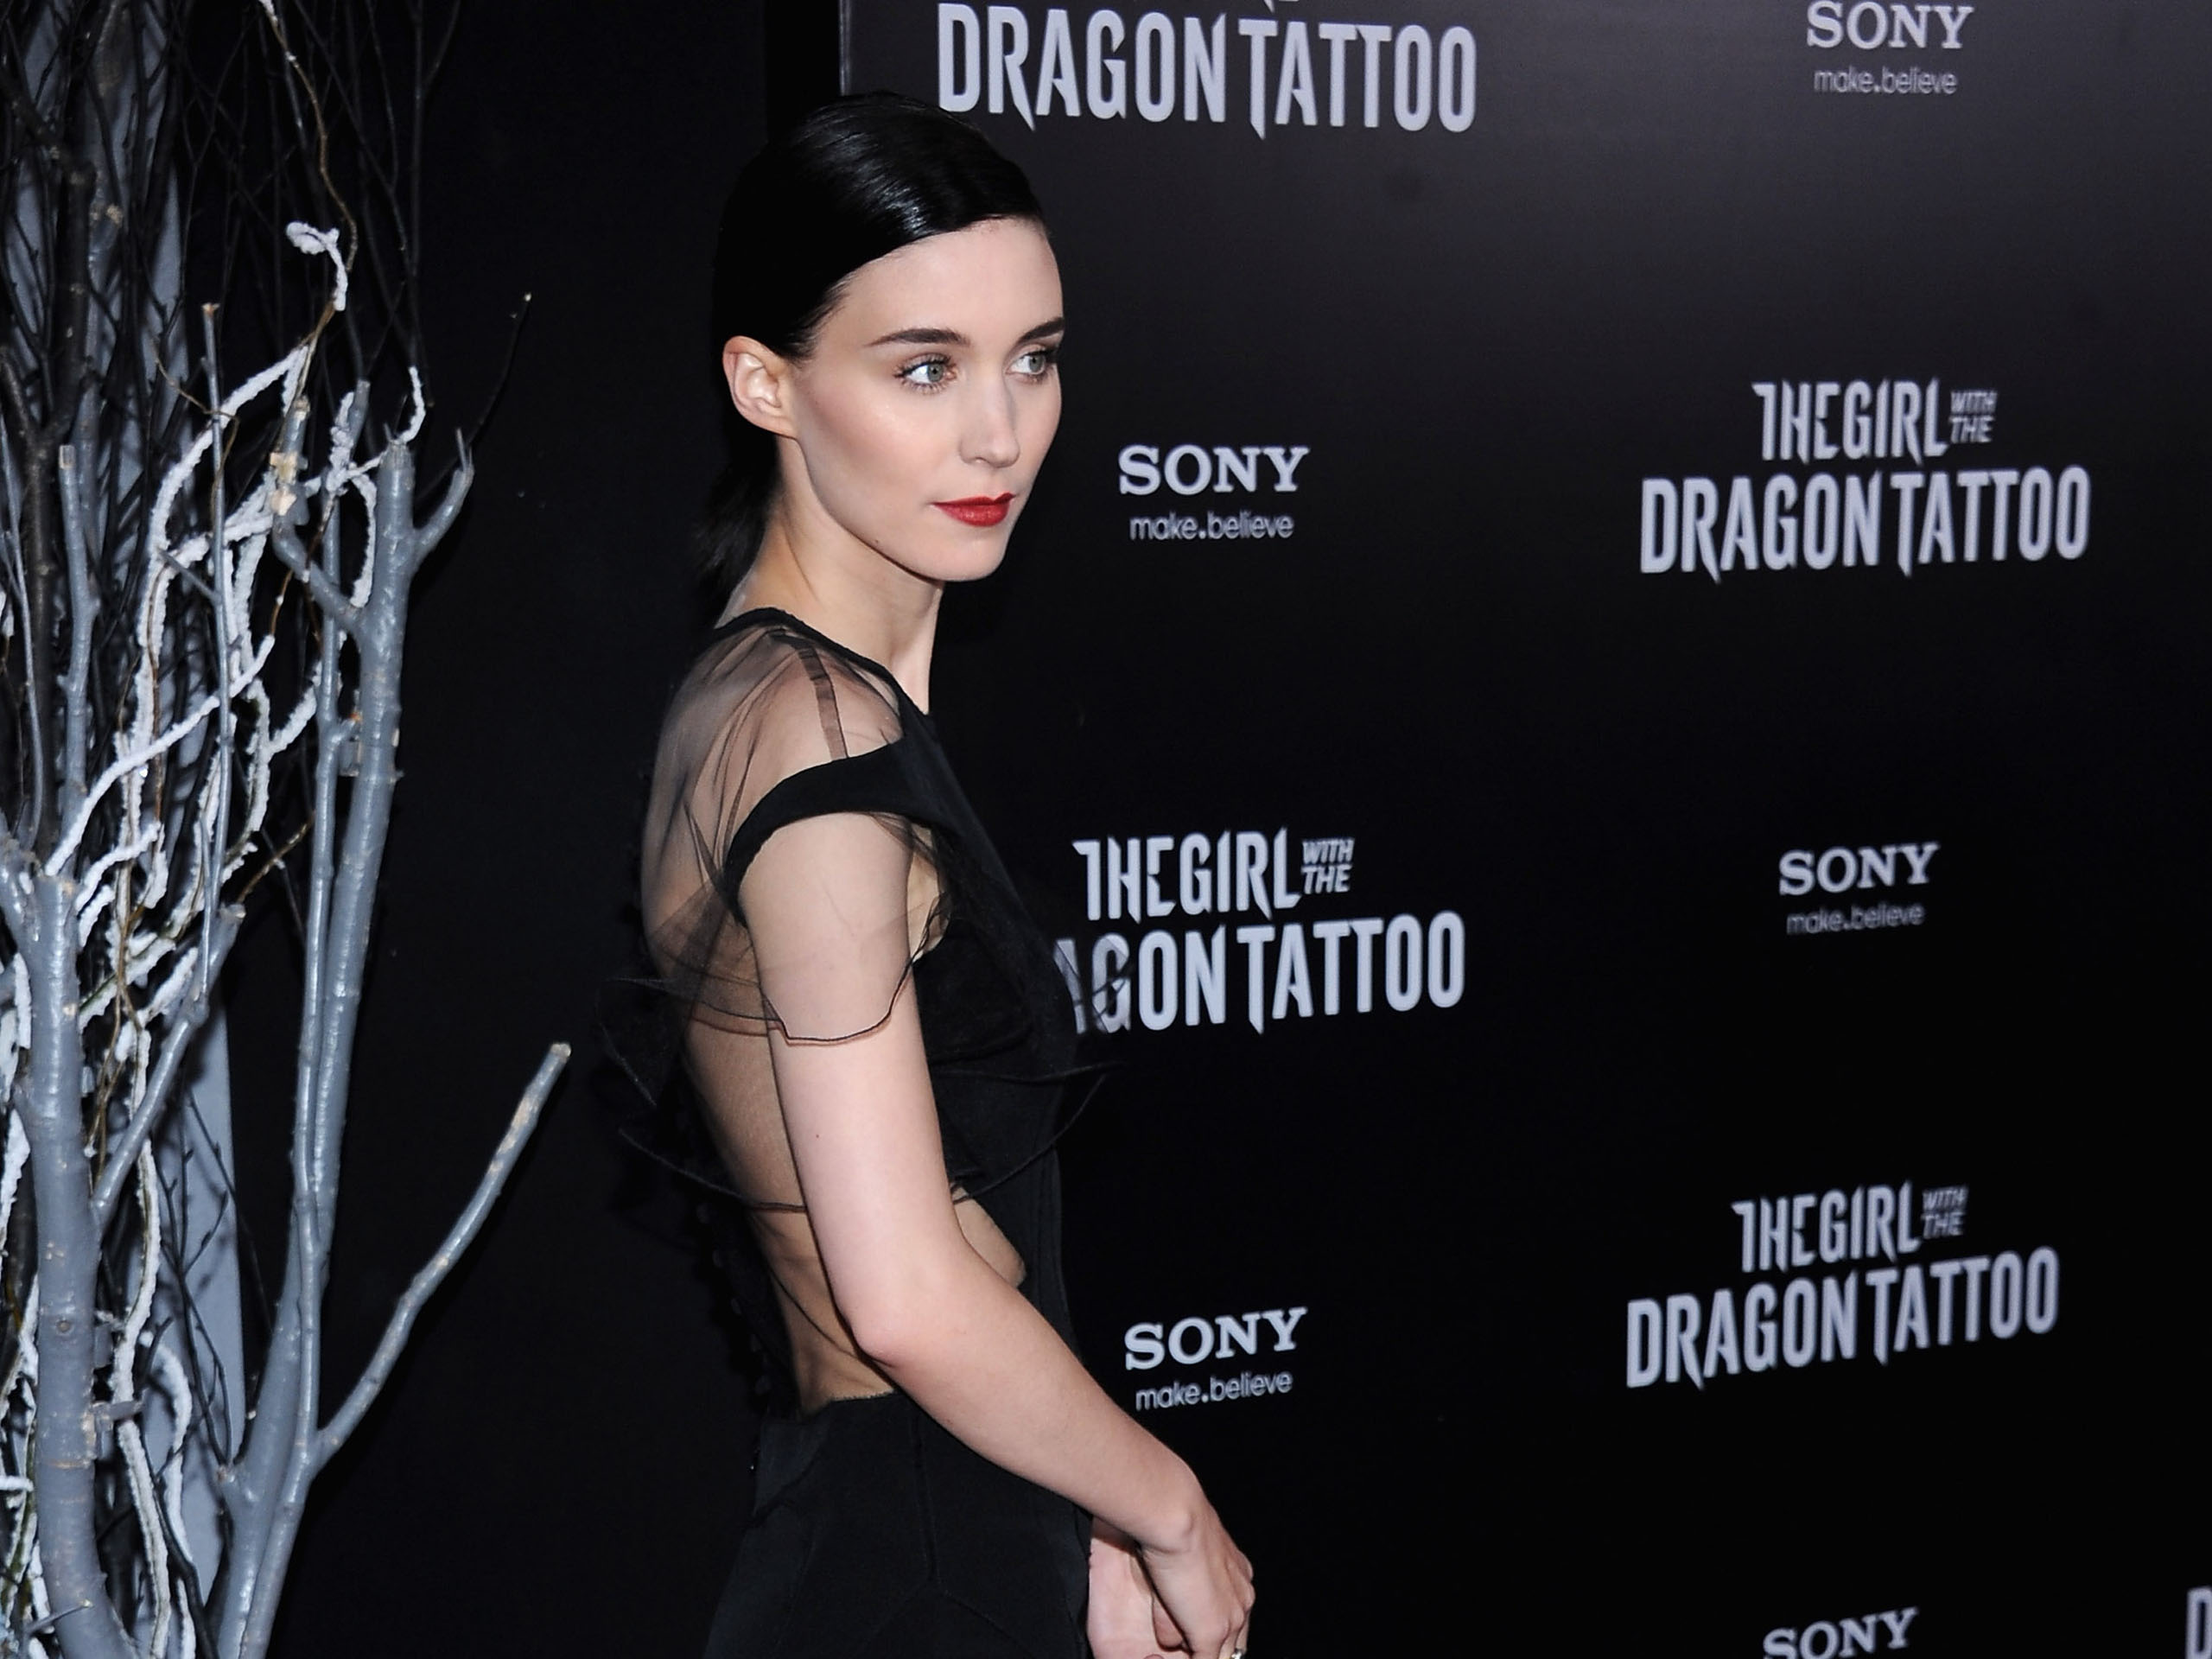 Rooney Mara, Celebrity wallpaper, Pictures collection, Px resolution, 2560x1920 HD Desktop